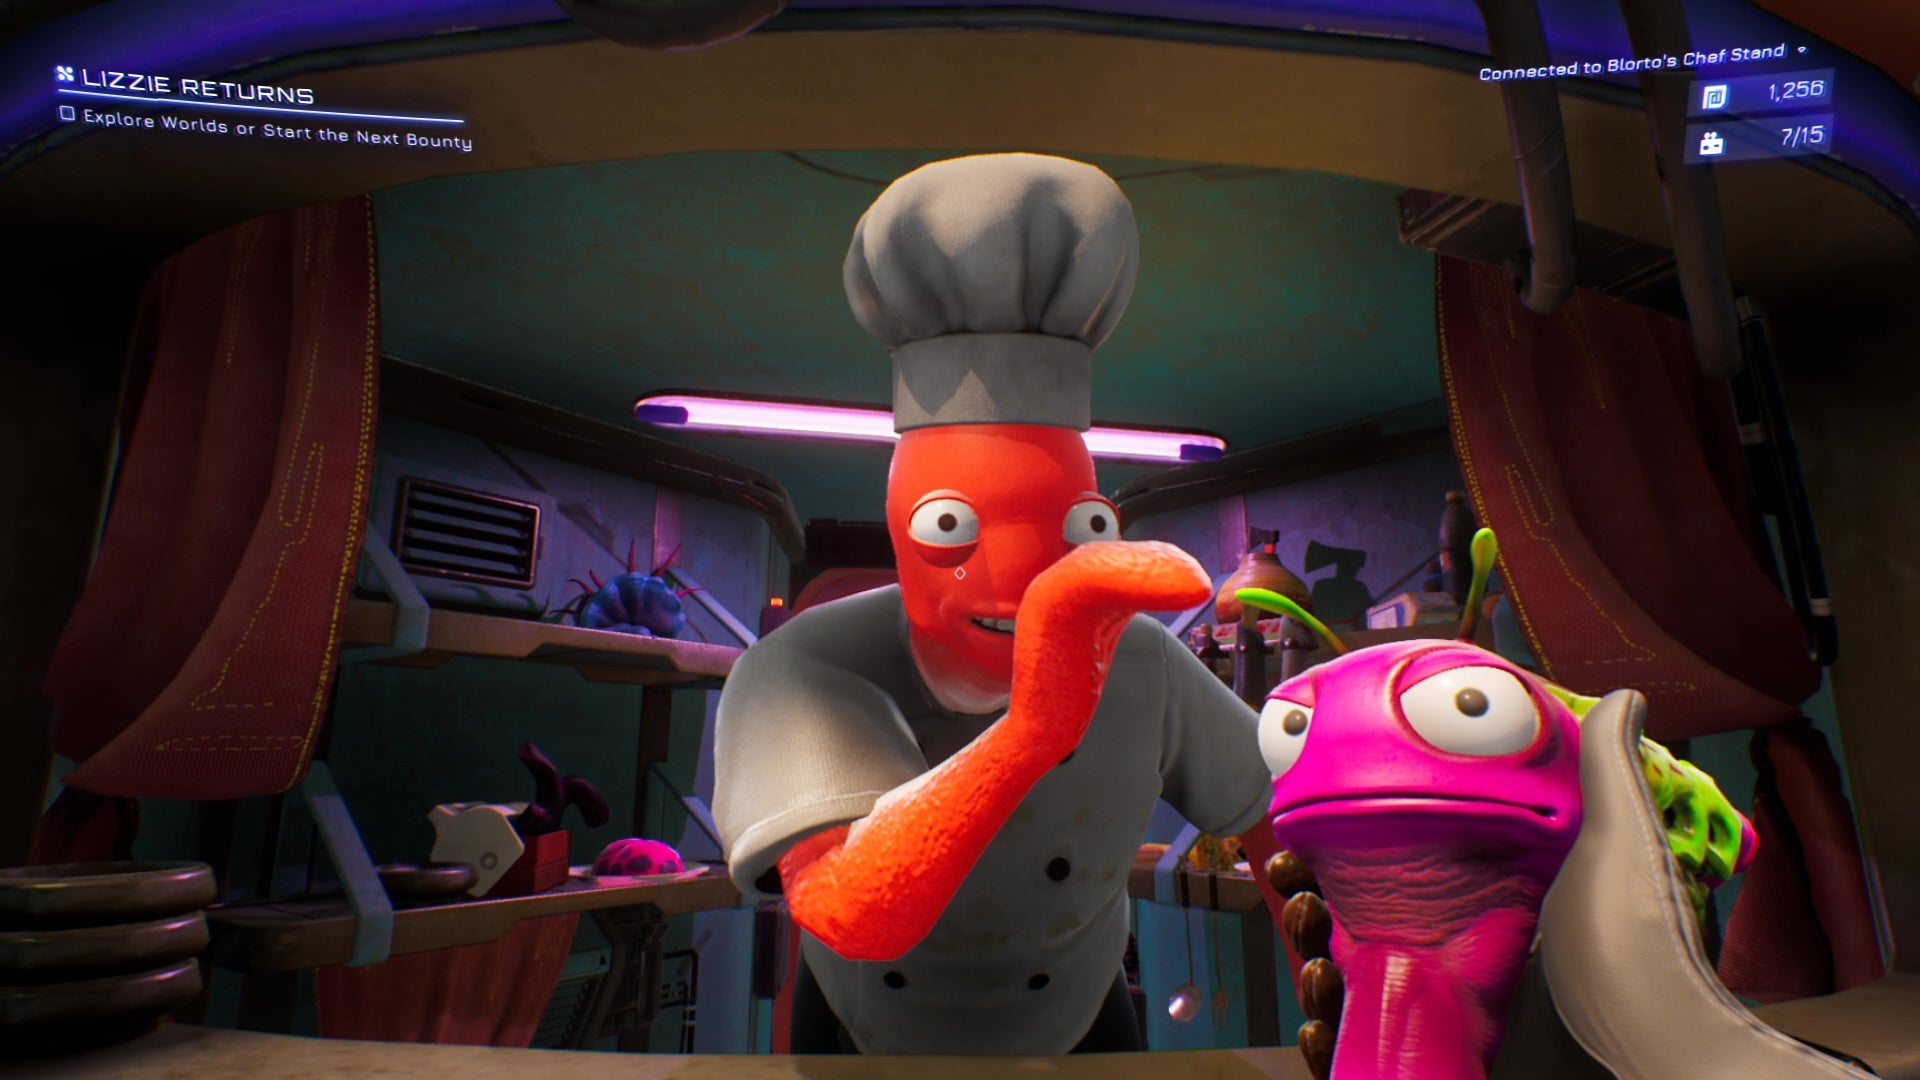 The player cradles a pink alien gun and speaks to Blorto, an orange alien who sneakily lets you in on his illegal activities in High On Life.